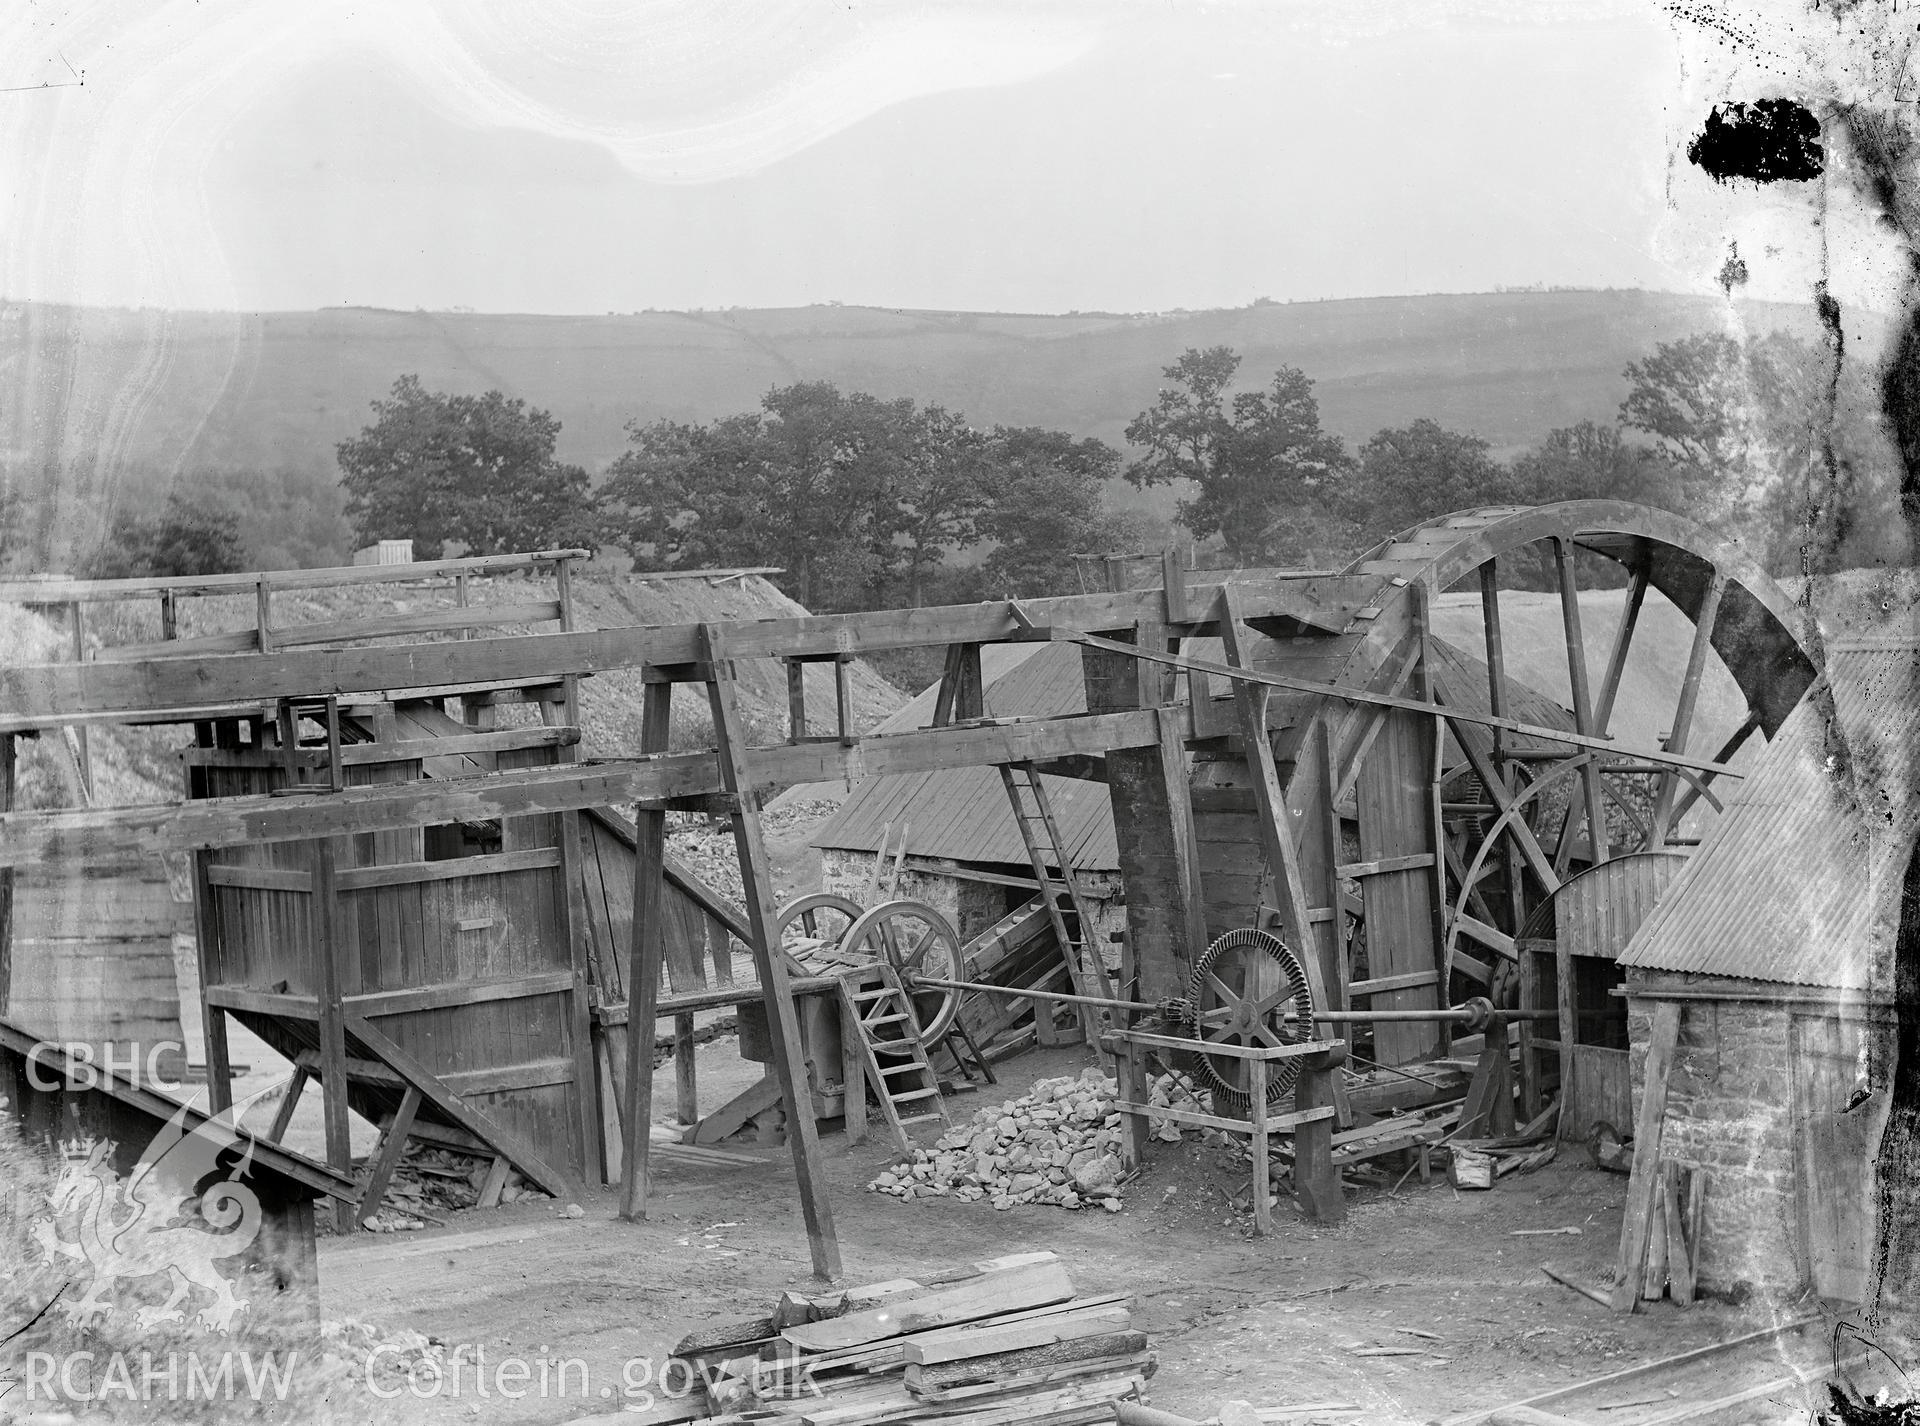 Black and white image dating from c.1910 showing machinery of unidentified purpose believed to be situated in or near Aberystwyth, possibly Llettyhen Mine(?), Cwmsymlog,  taken by Emile T. Evans.